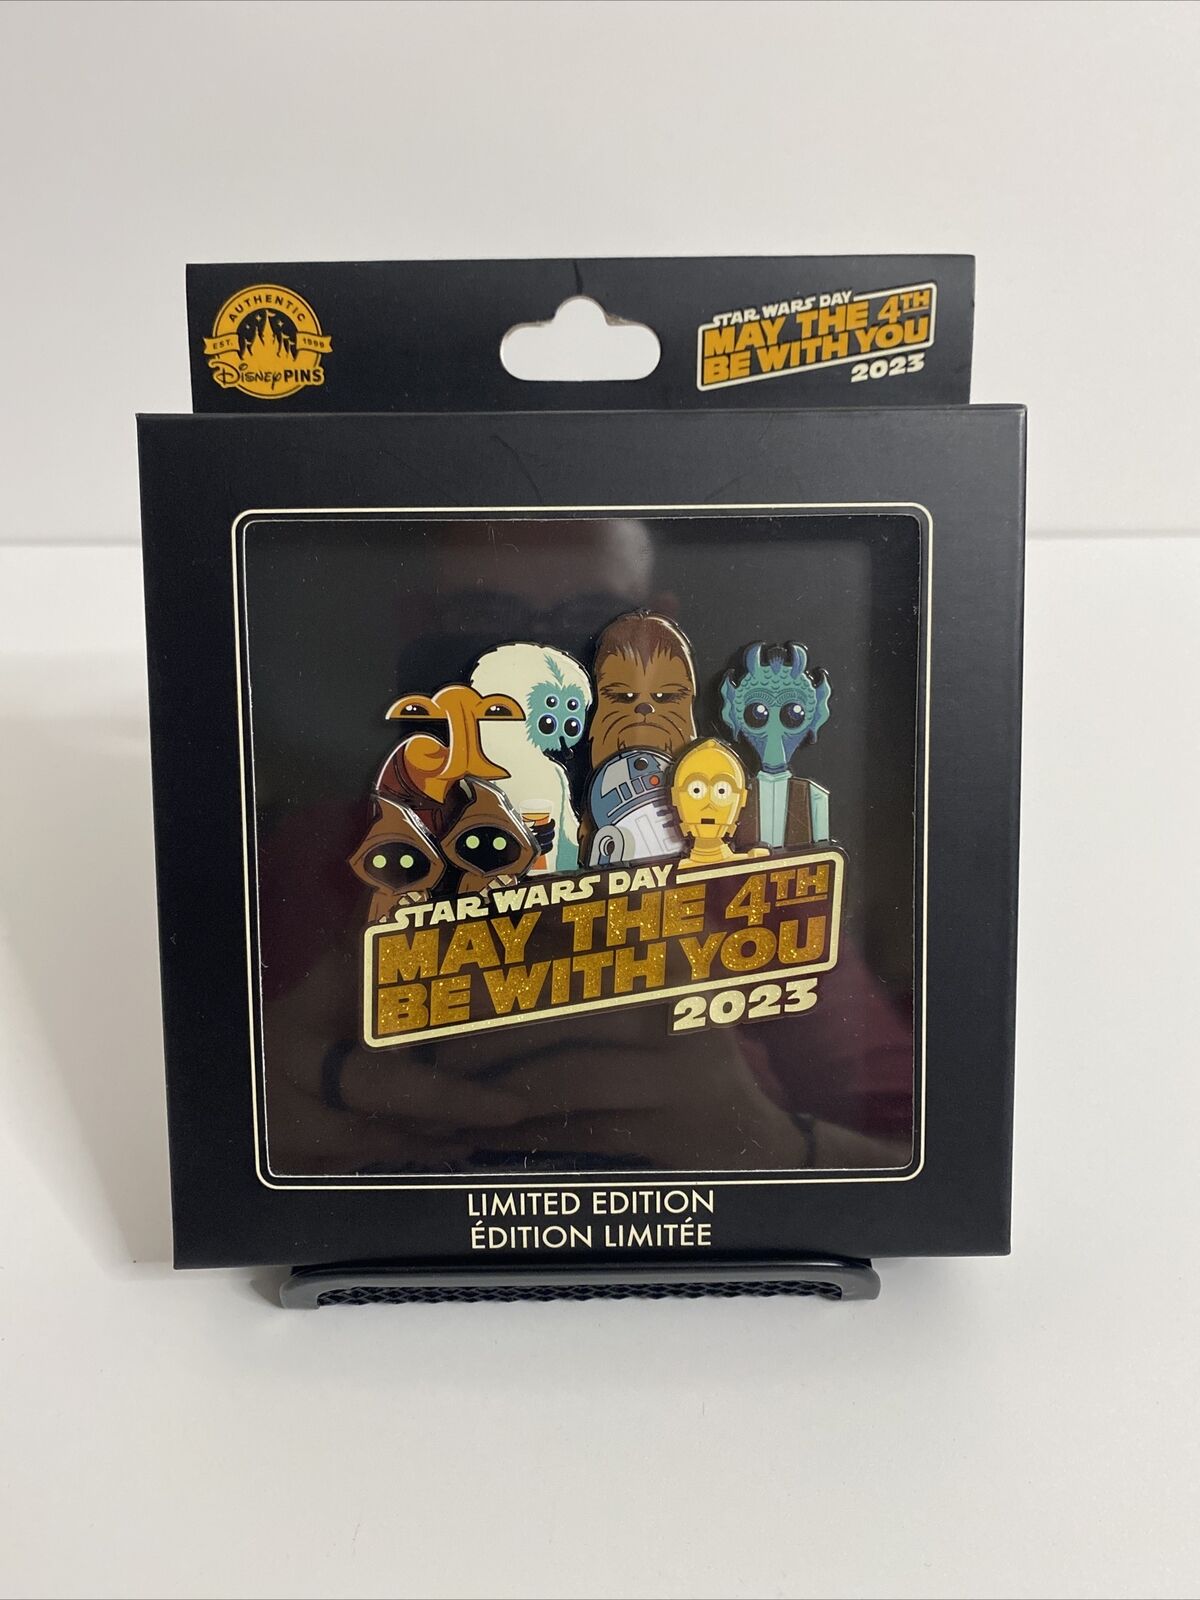 Disney Pin Star Wars May The 4th Be With You 2023 Jumbo Limited Edition of 4000